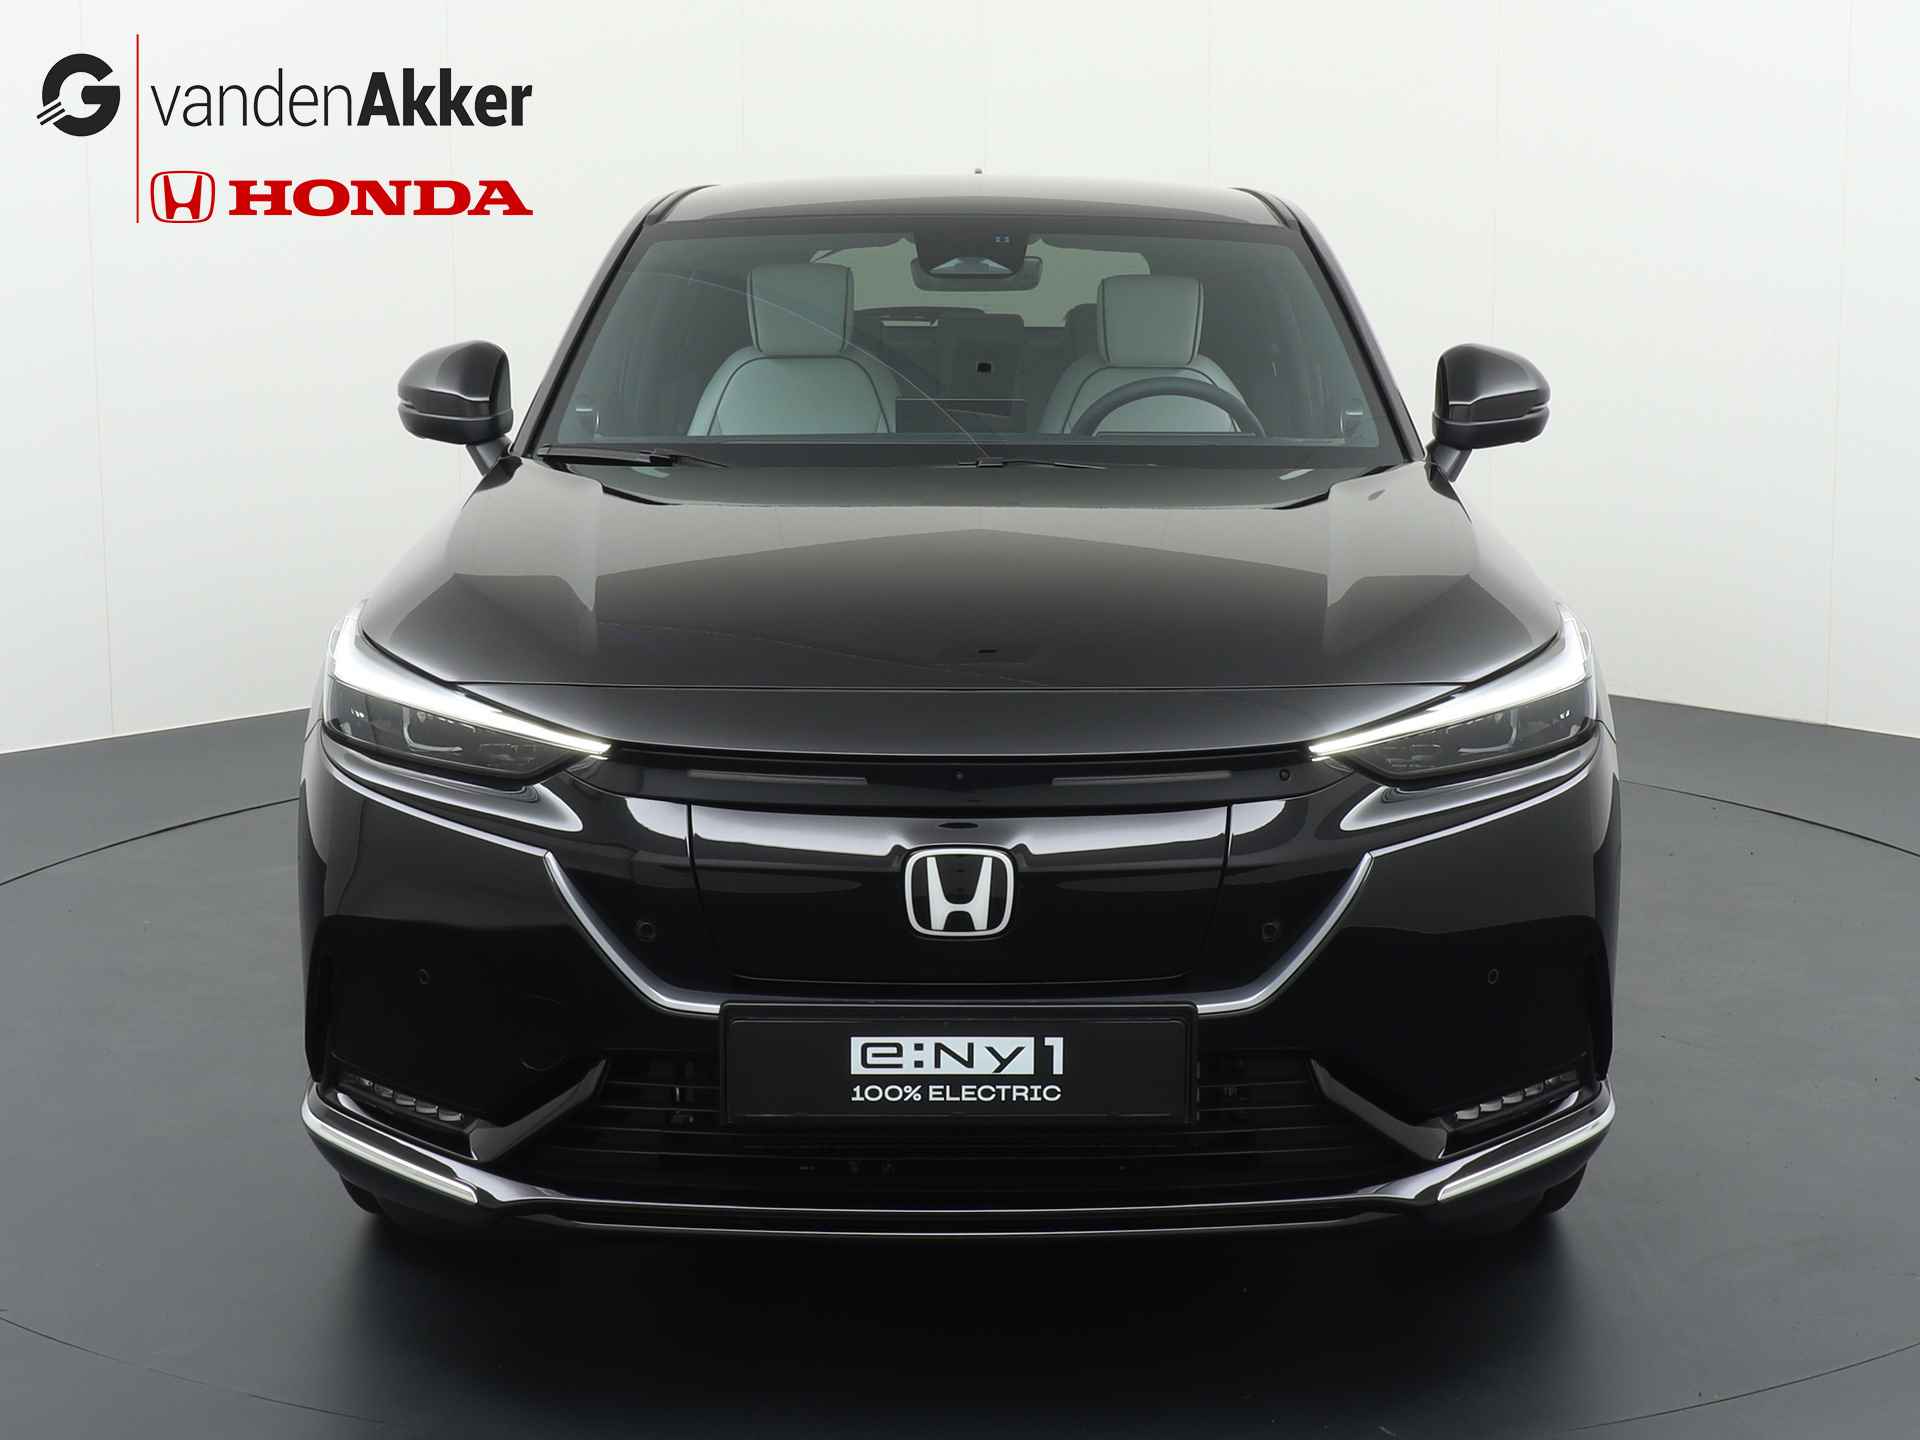 HONDA E:ny1 68,8 kWh 204pk Aut Limited Edition Full Electric Actieprijs € 495,- Private Lease - 9/47